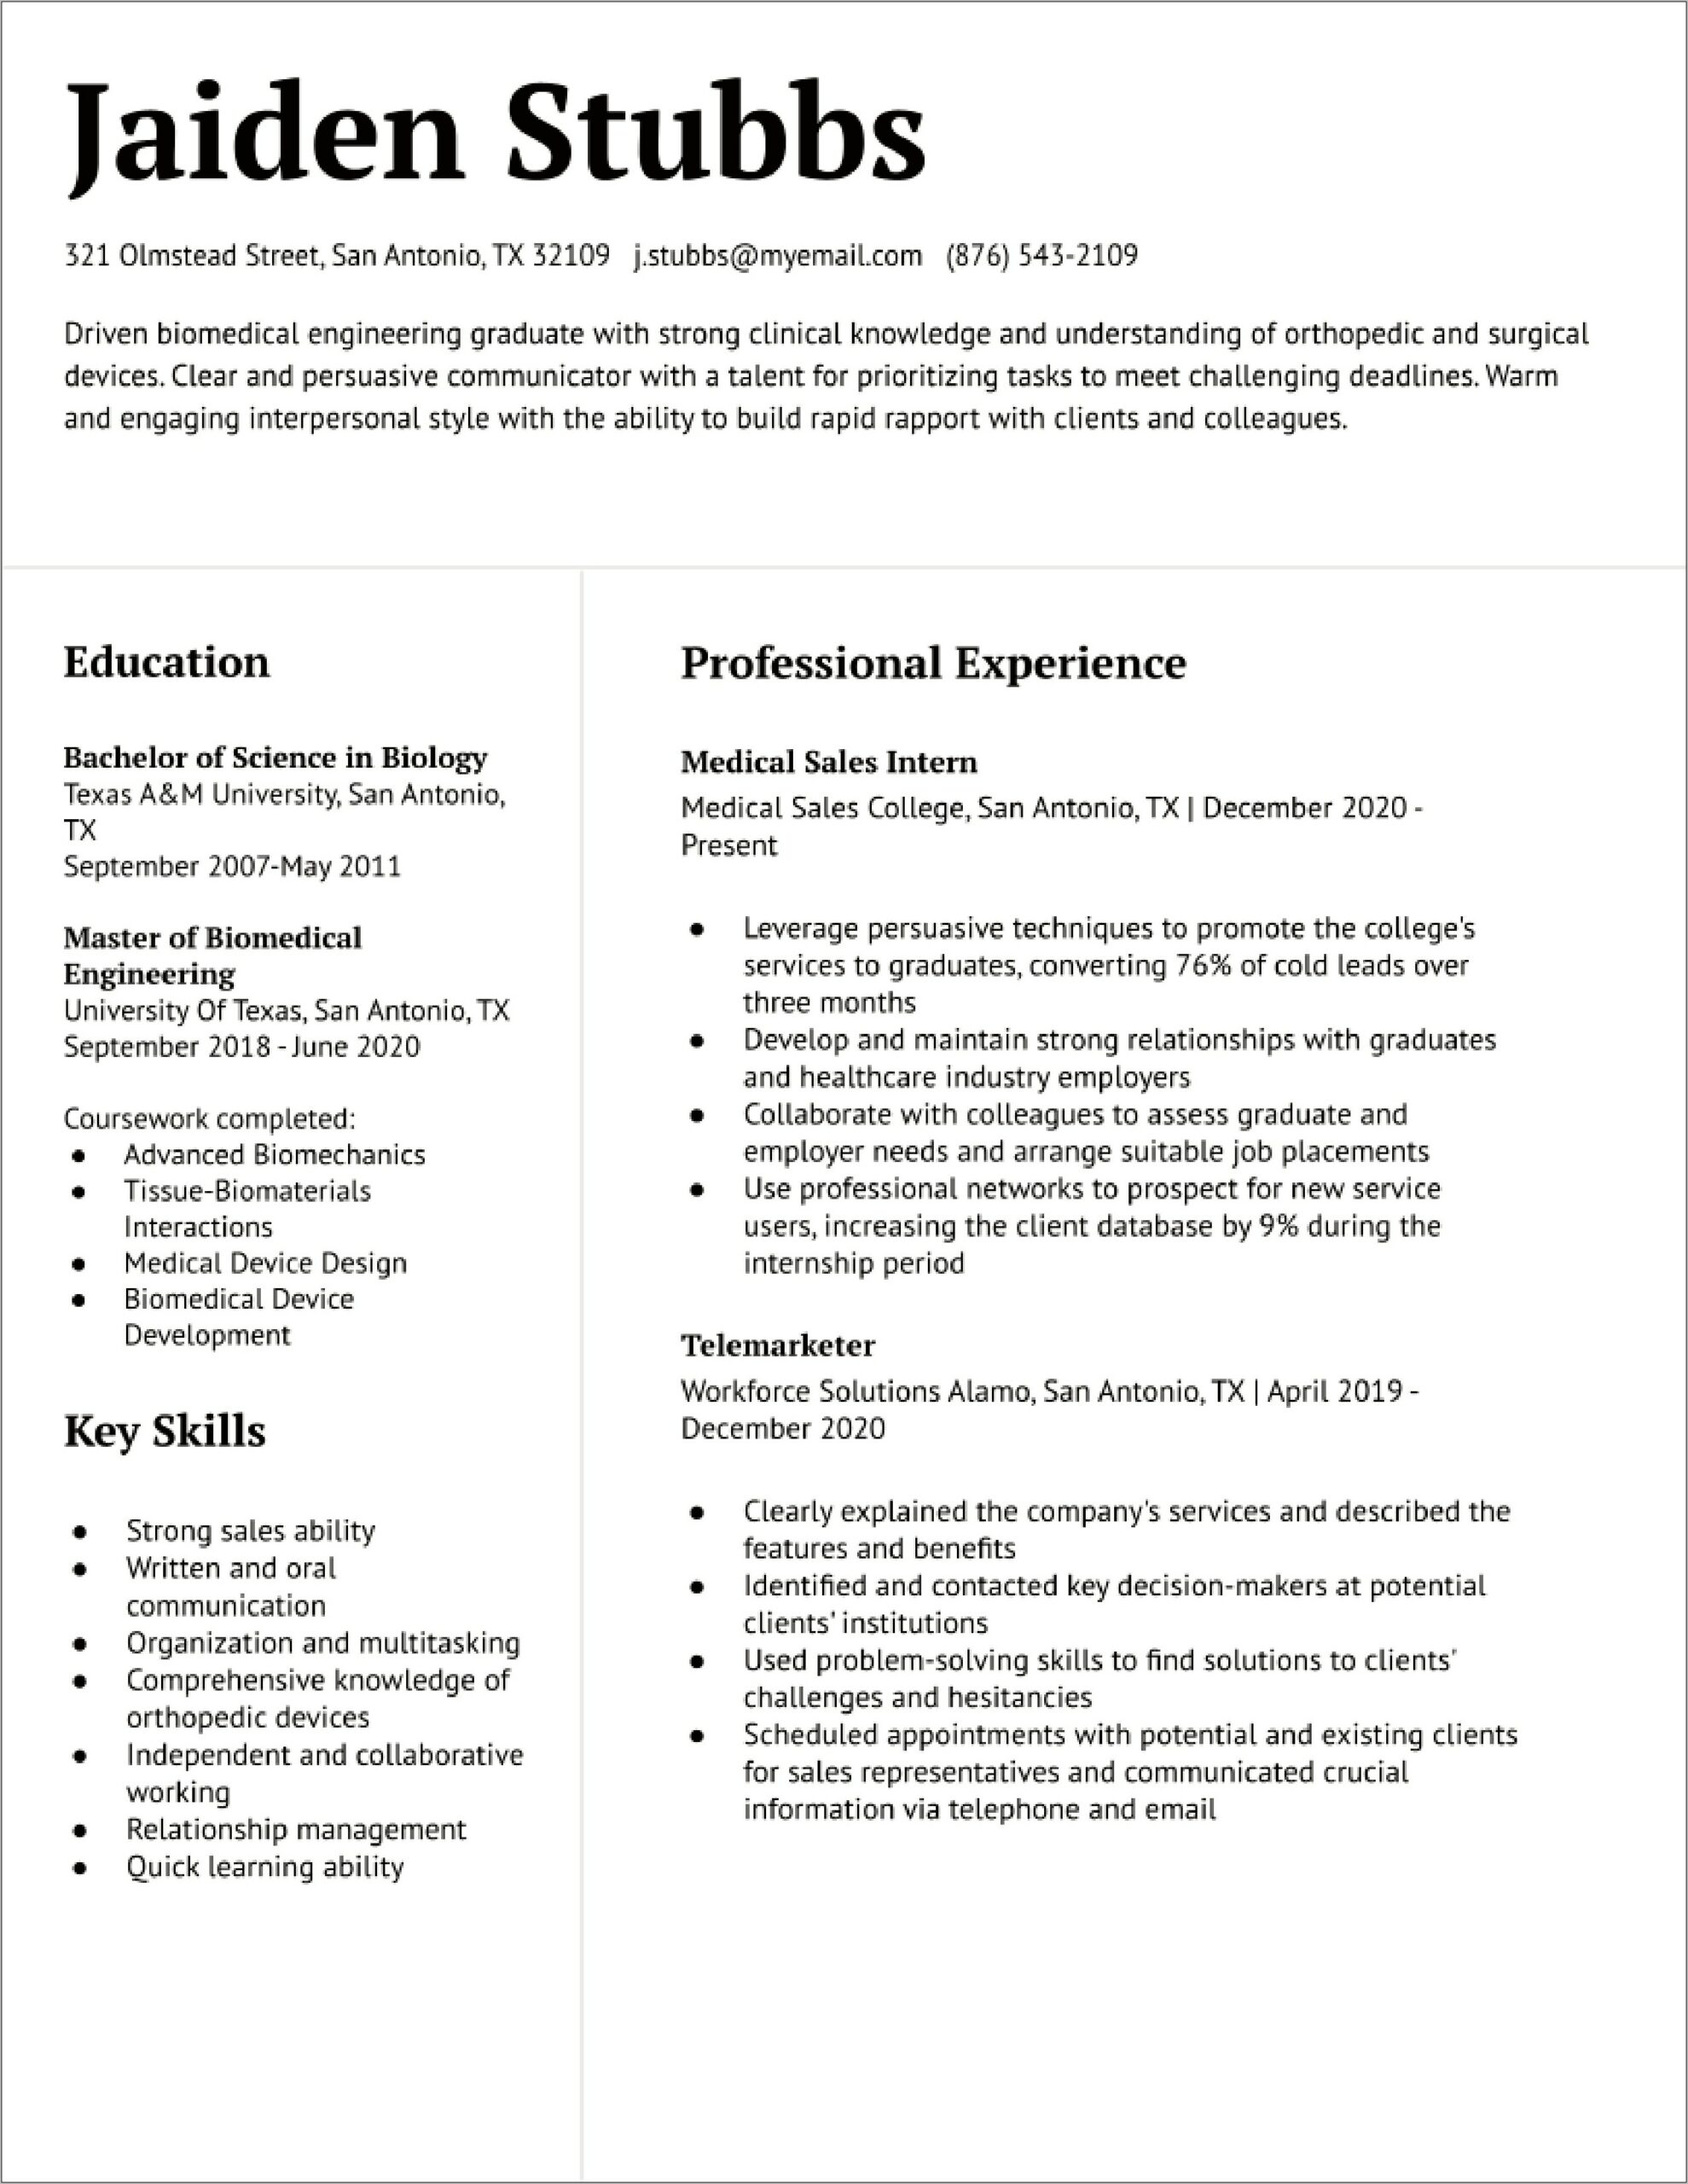 Resume Objective For Sales Position